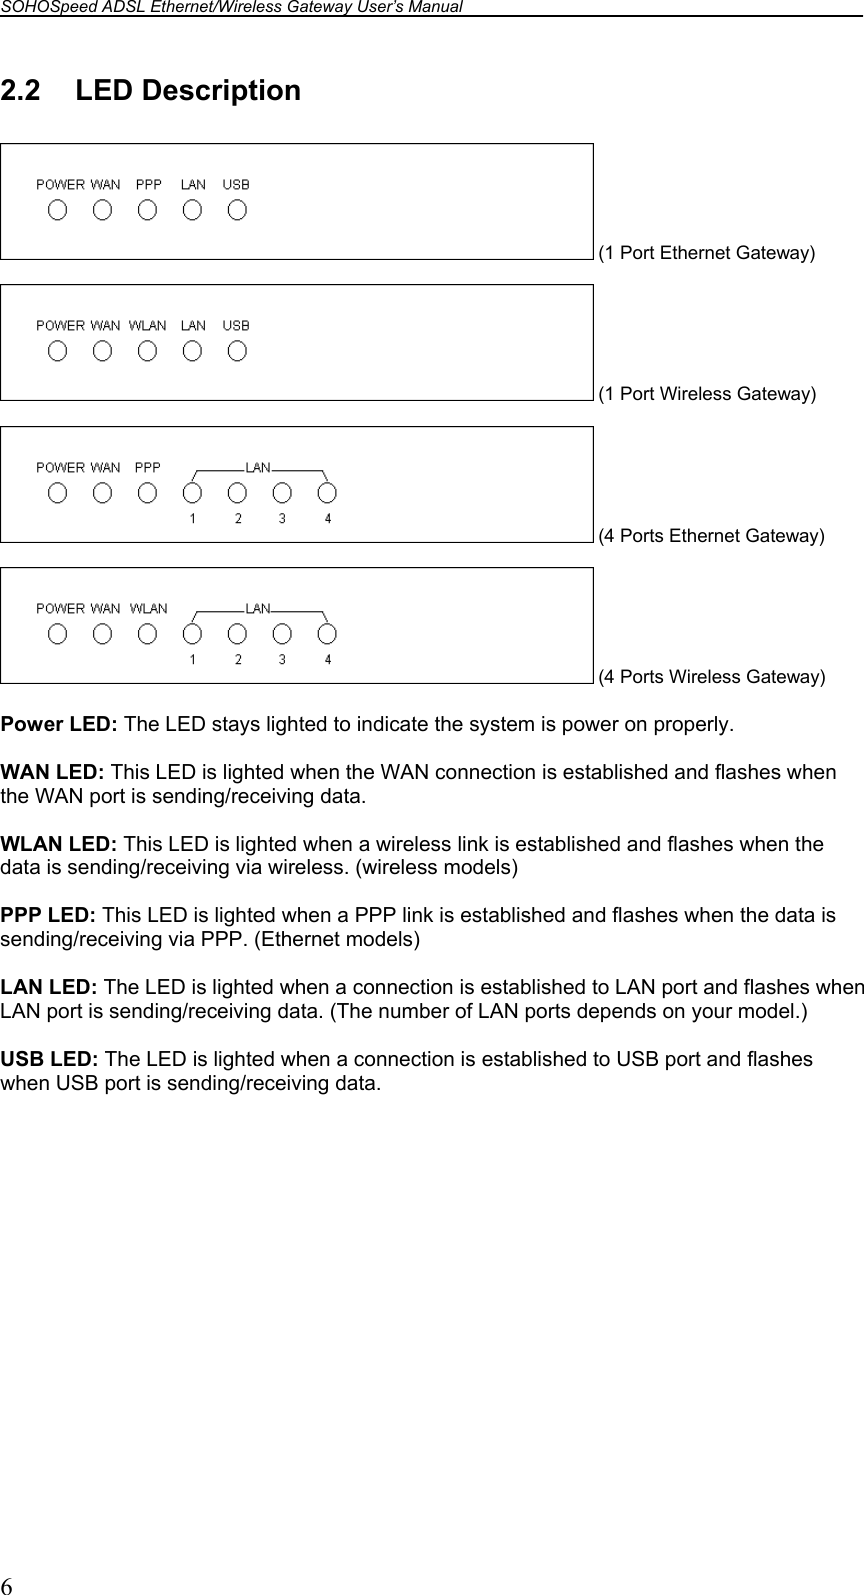 SOHOSpeed ADSL Ethernet/Wireless Gateway User’s Manual    6 2.2 LED Description   (1 Port Ethernet Gateway)   (1 Port Wireless Gateway)   (4 Ports Ethernet Gateway)   (4 Ports Wireless Gateway)  Power LED: The LED stays lighted to indicate the system is power on properly.  WAN LED: This LED is lighted when the WAN connection is established and flashes when the WAN port is sending/receiving data.  WLAN LED: This LED is lighted when a wireless link is established and flashes when the data is sending/receiving via wireless. (wireless models)  PPP LED: This LED is lighted when a PPP link is established and flashes when the data is sending/receiving via PPP. (Ethernet models)  LAN LED: The LED is lighted when a connection is established to LAN port and flashes when LAN port is sending/receiving data. (The number of LAN ports depends on your model.)  USB LED: The LED is lighted when a connection is established to USB port and flashes when USB port is sending/receiving data.   